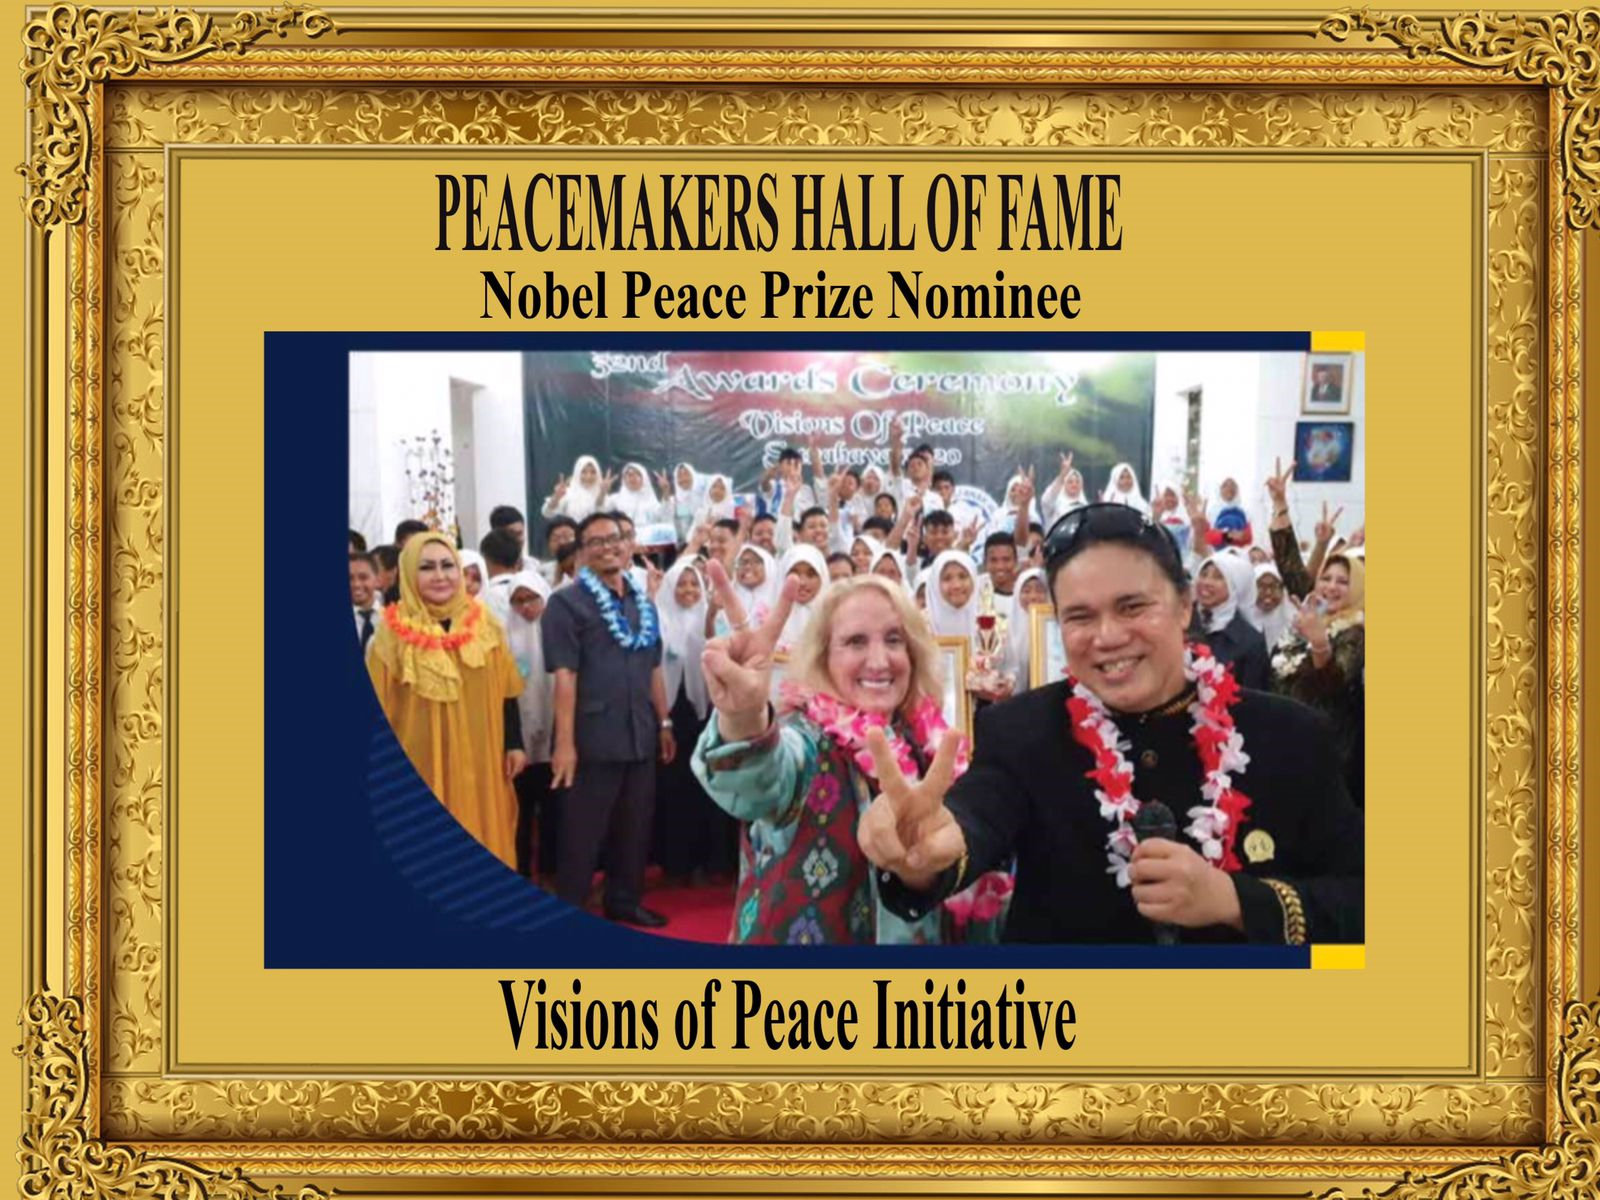 Visions of Peace Initiative, Wednesday, March 9, 2022, Press release picture